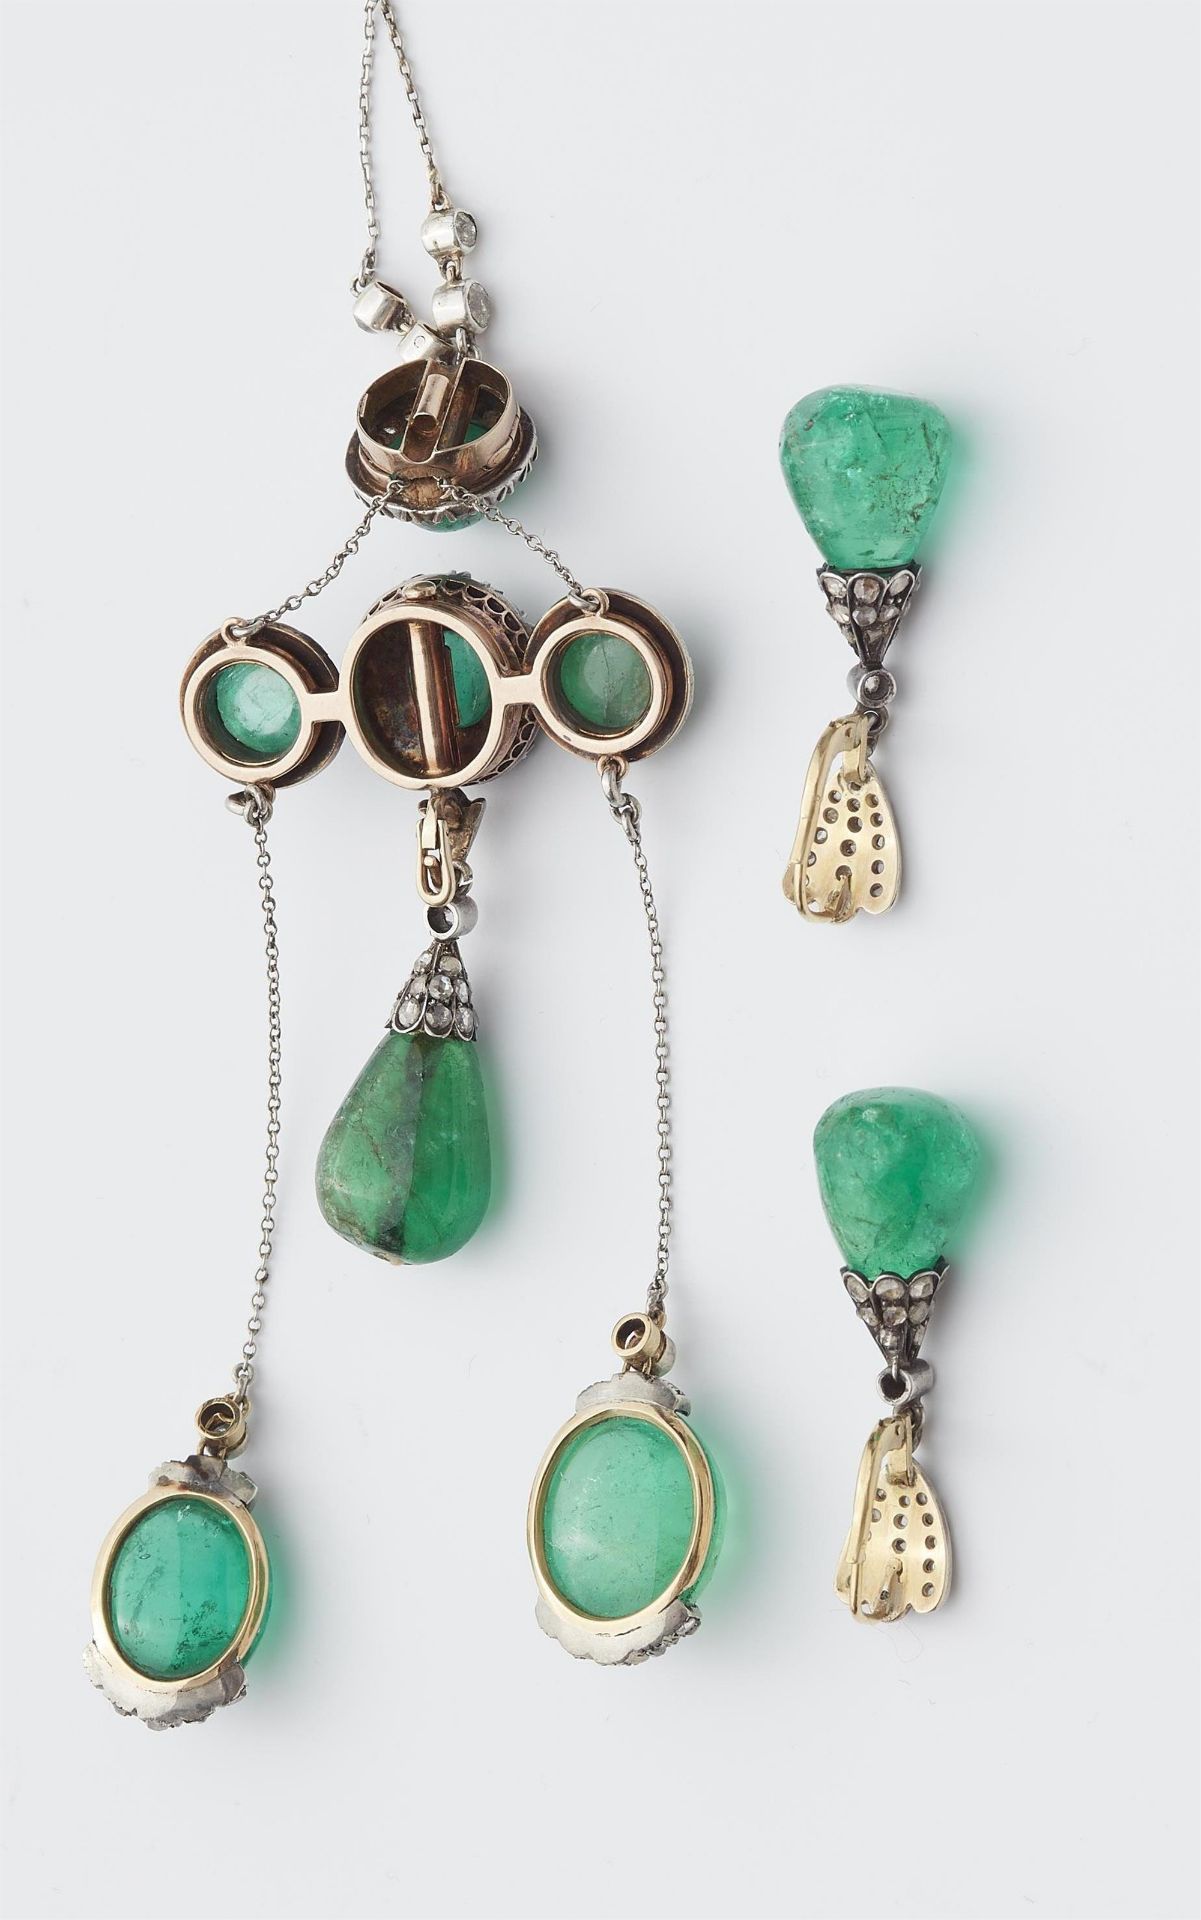 Parts of Italian antique silver 14k gold, emerald and diamond jewellery set comprising a multi-part  - Image 4 of 4